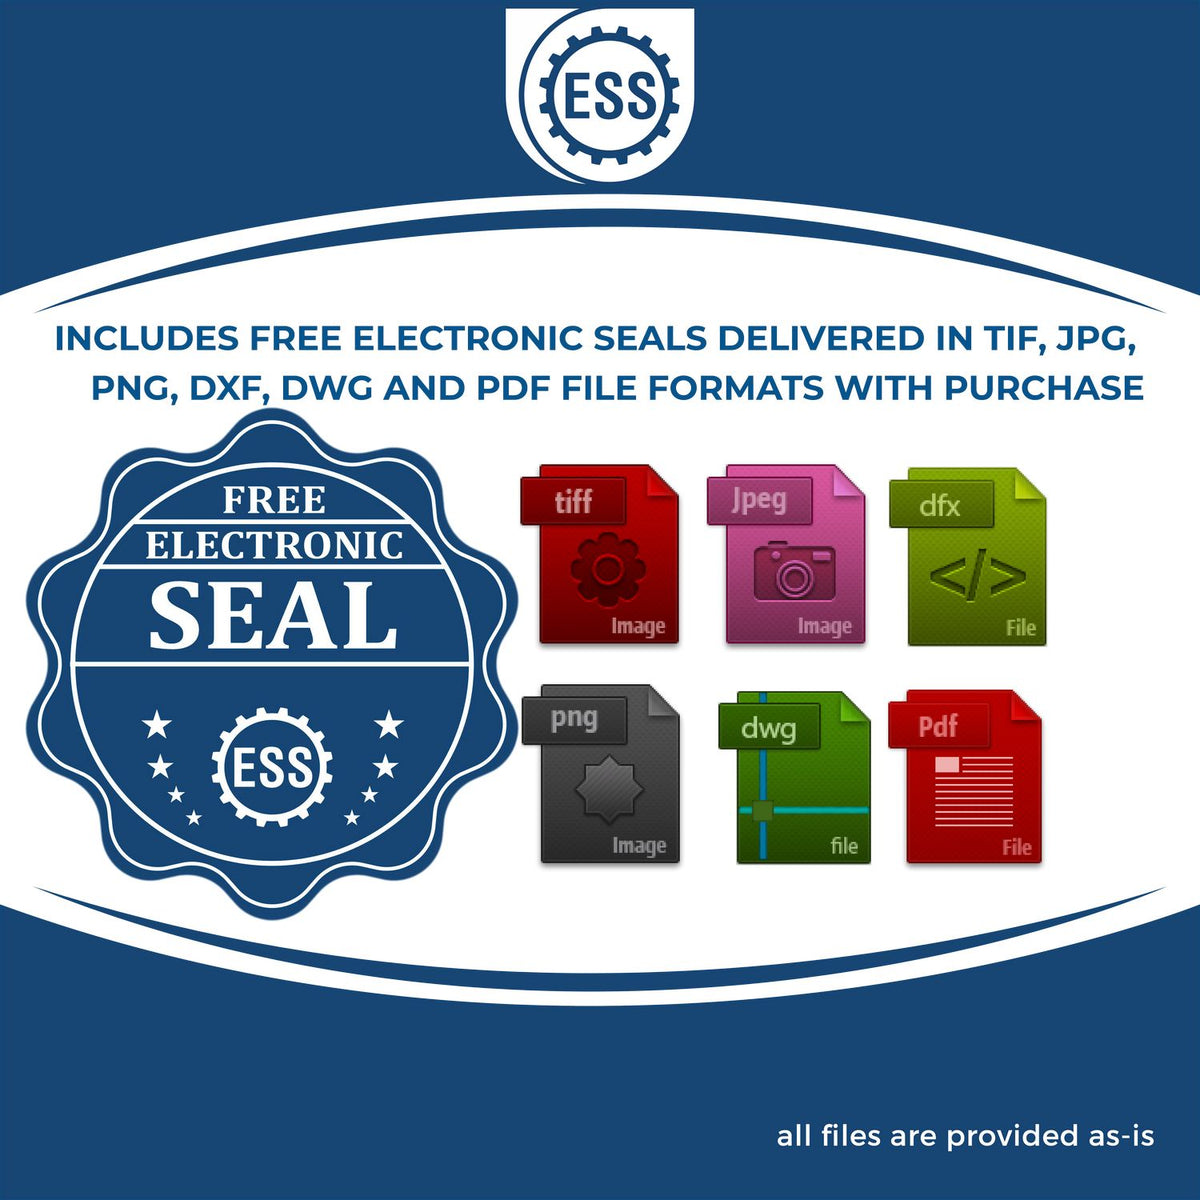 An infographic for the free electronic seal for the PSI Oregon Notary Stamp illustrating the different file type icons such as DXF, DWG, TIF, JPG and PNG.